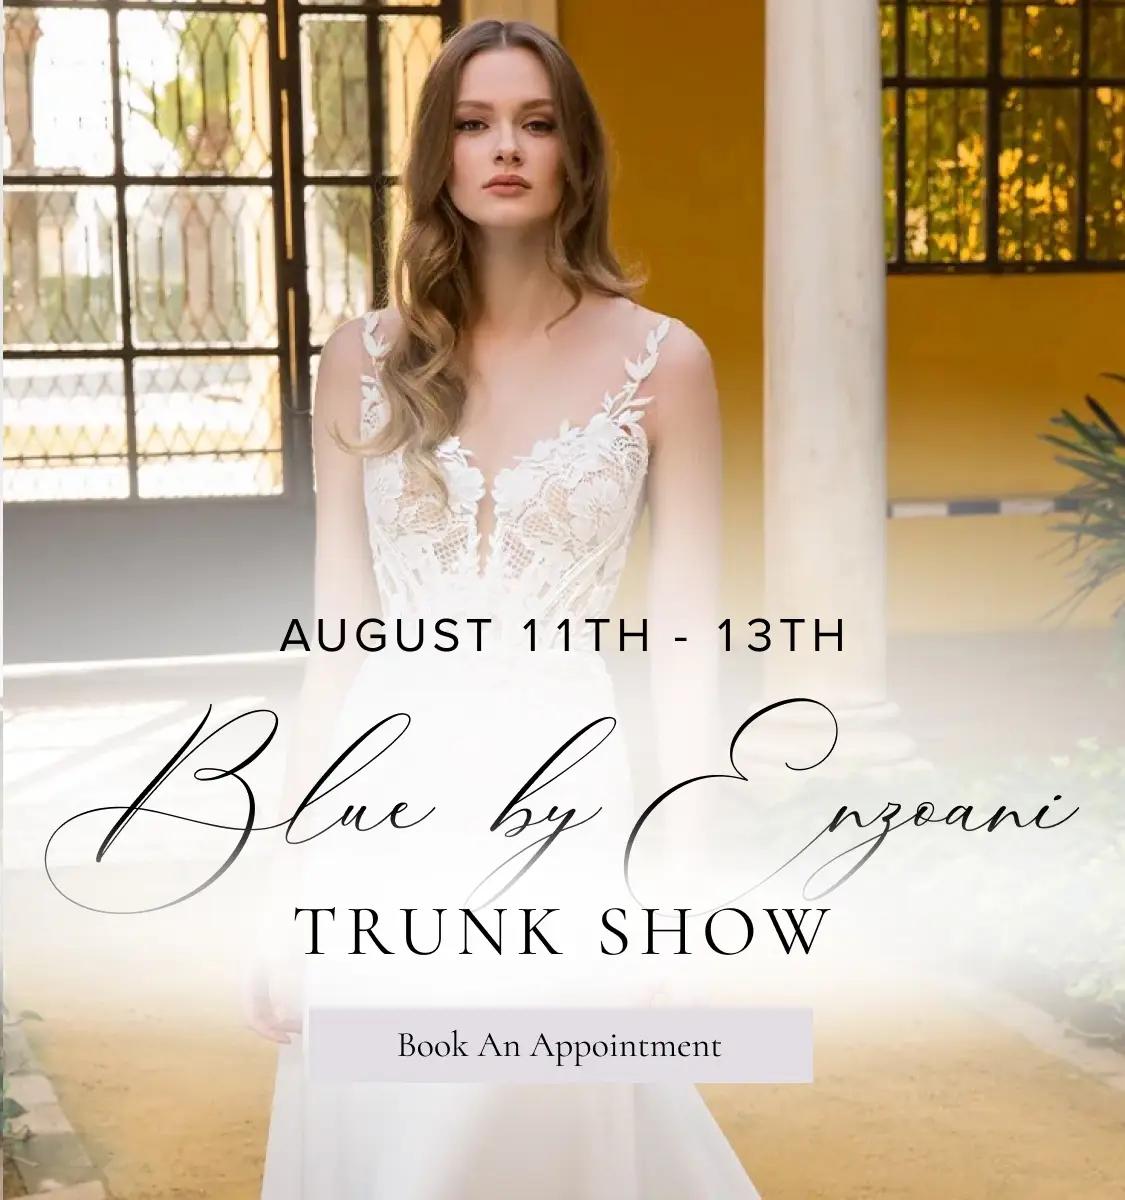 "Blue by Enzoani Trunk Show" banner for mobile